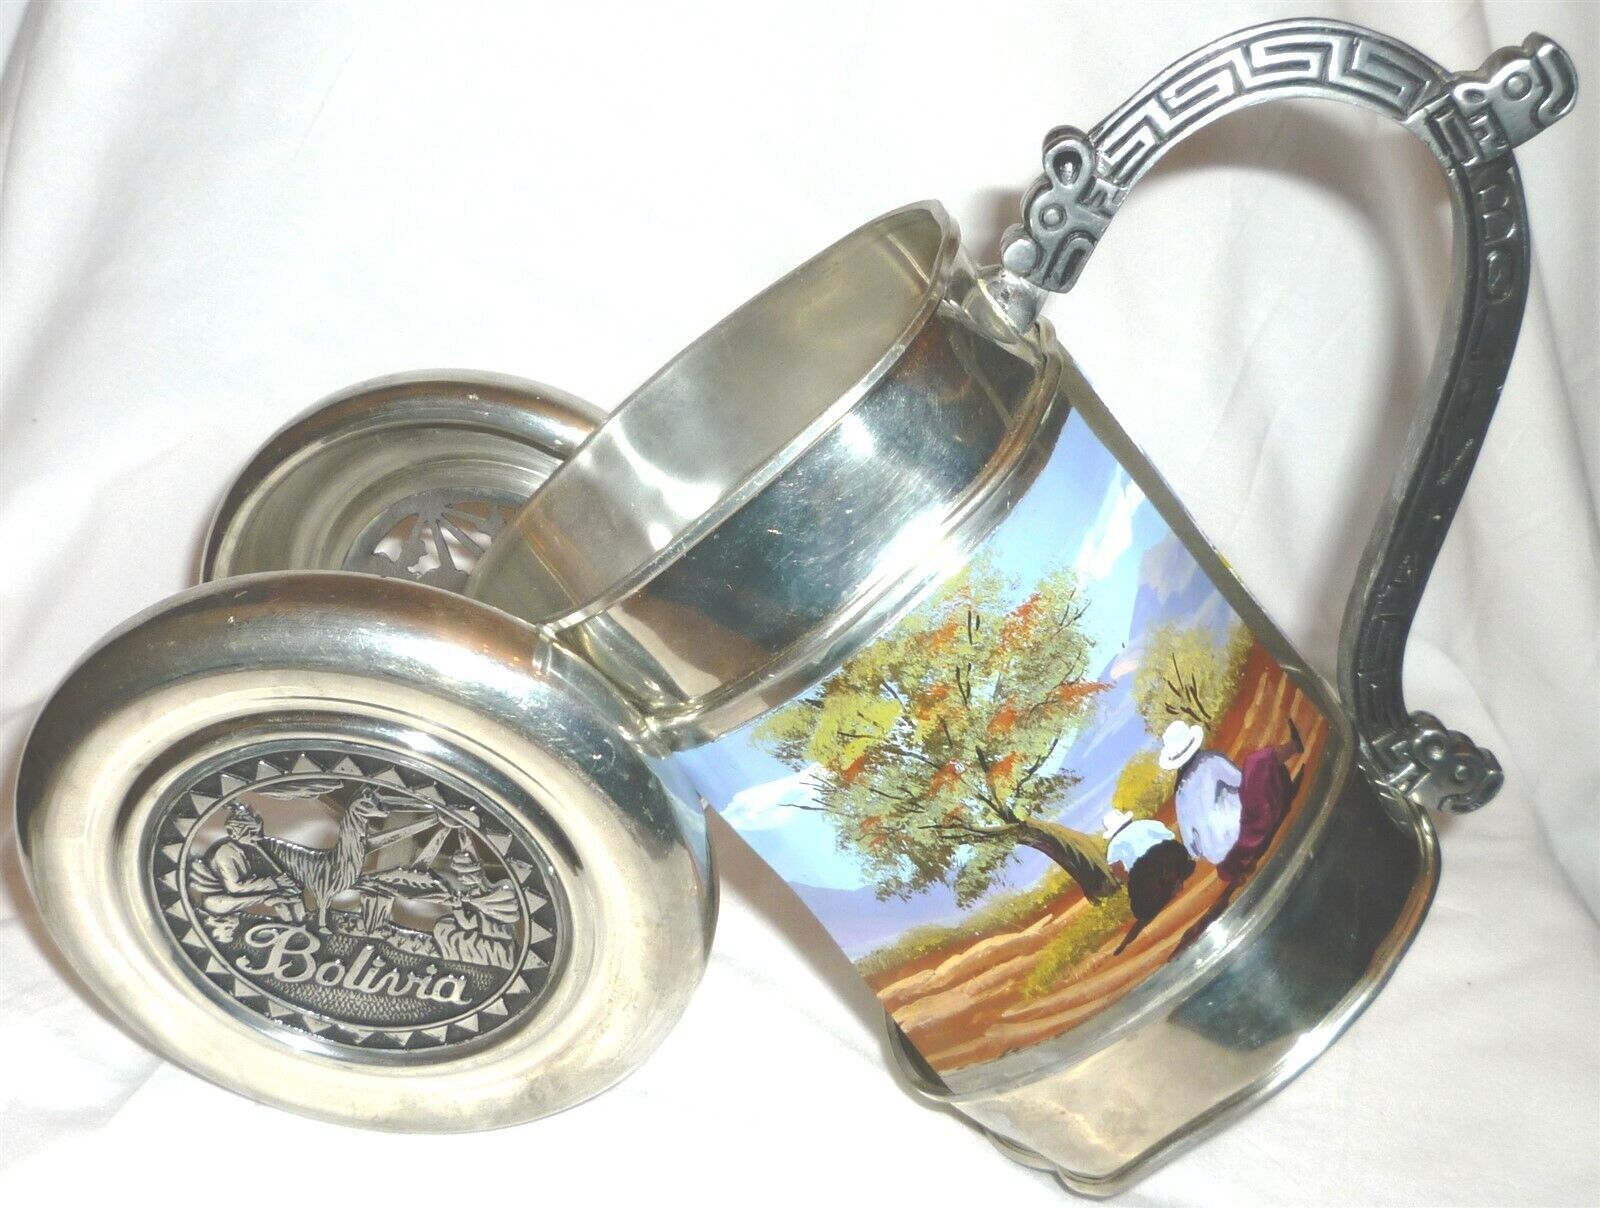 HANDCRAFTED PEWTER WINE BOTTLE CANNON HOLDER PAINTED SCENERY BOLIVIA CREATIONS - $38.00